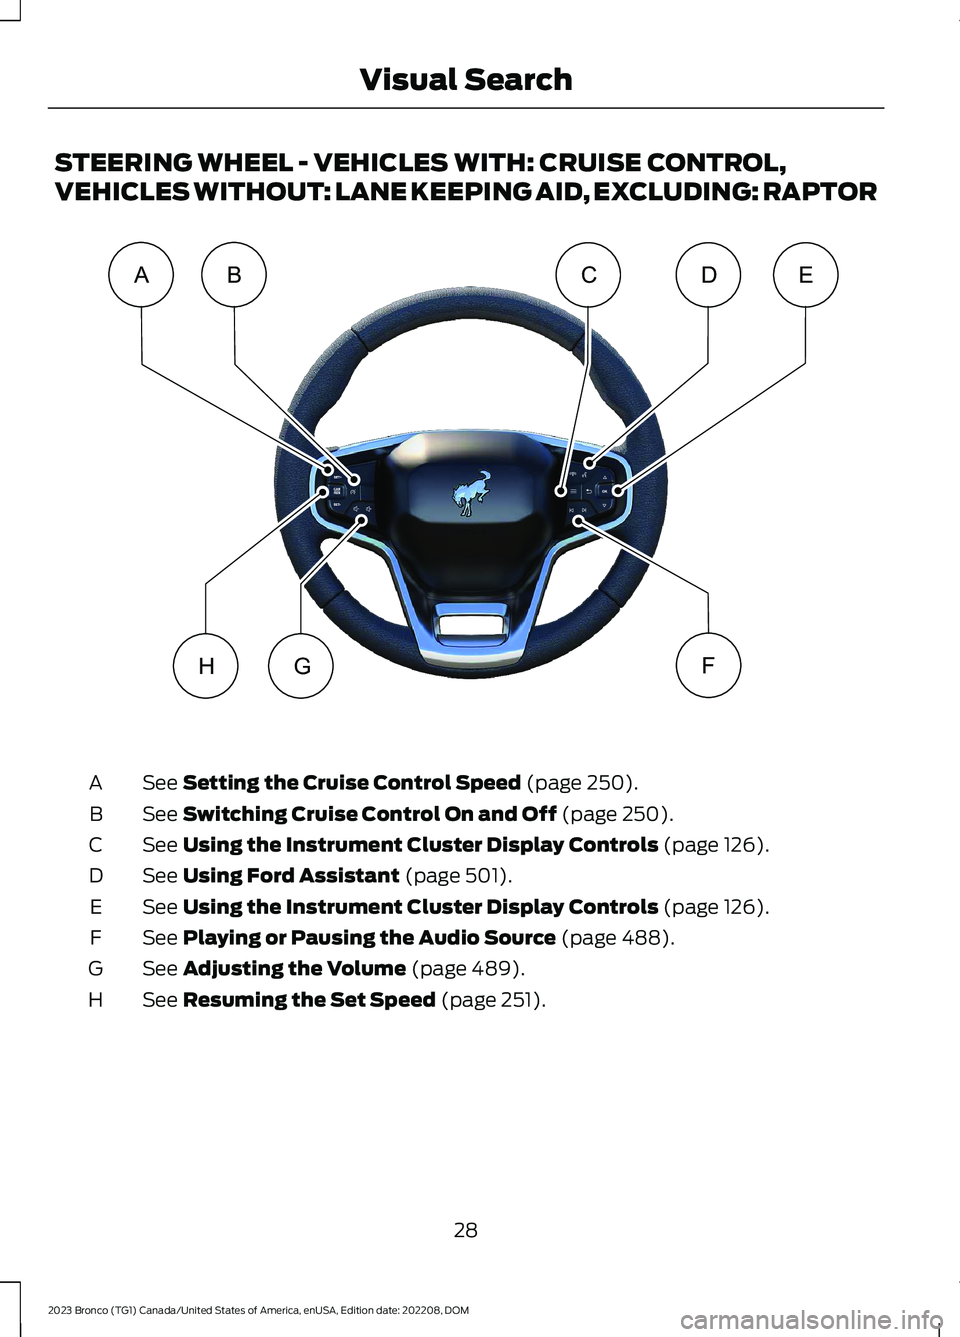 FORD BRONCO 2023  Owners Manual STEERING WHEEL - VEHICLES WITH: CRUISE CONTROL,
VEHICLES WITHOUT: LANE KEEPING AID, EXCLUDING: RAPTOR
See Setting the Cruise Control Speed (page 250).A
See Switching Cruise Control On and Off (page 25